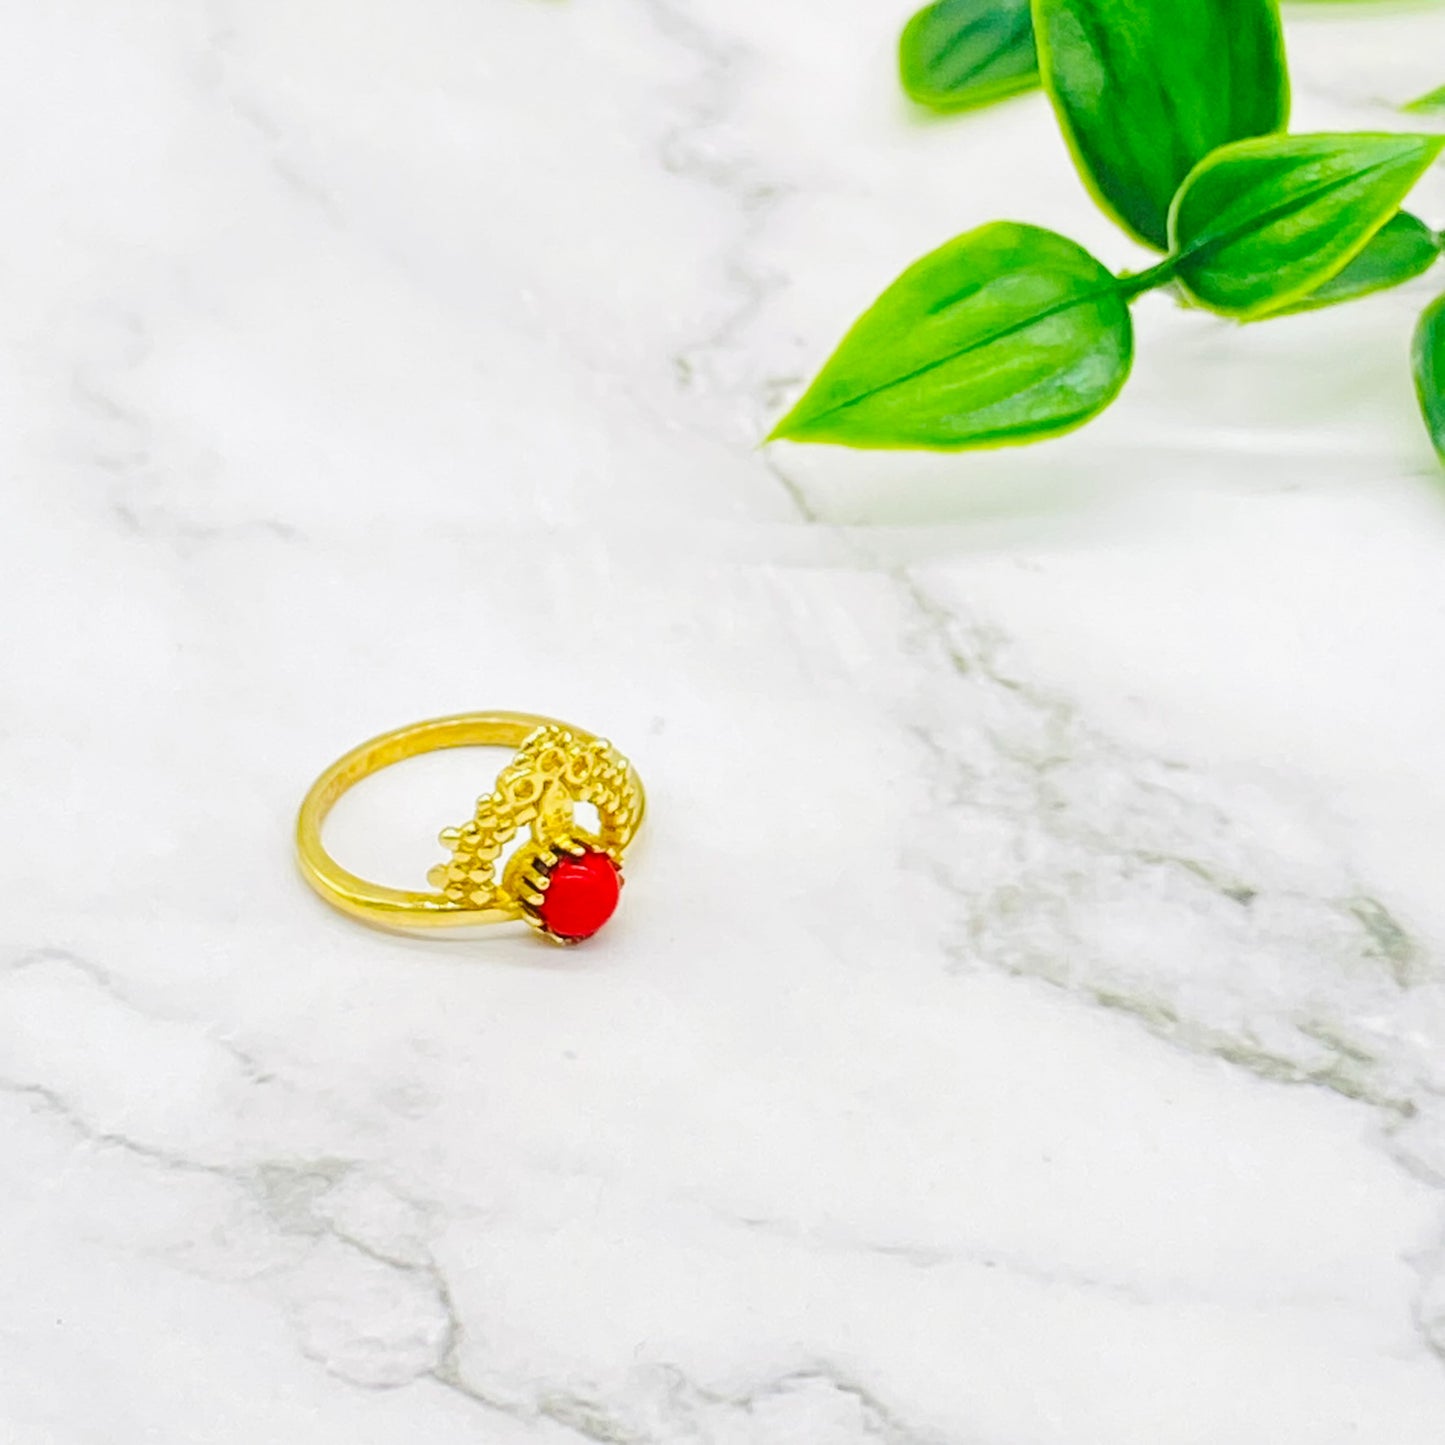 Gold FIlled Natural Crystal Ring, Healing Crystals, Gift For Her, Mothers Day Gift, Statement Ring, Handmade Ring, Minimalistic Style